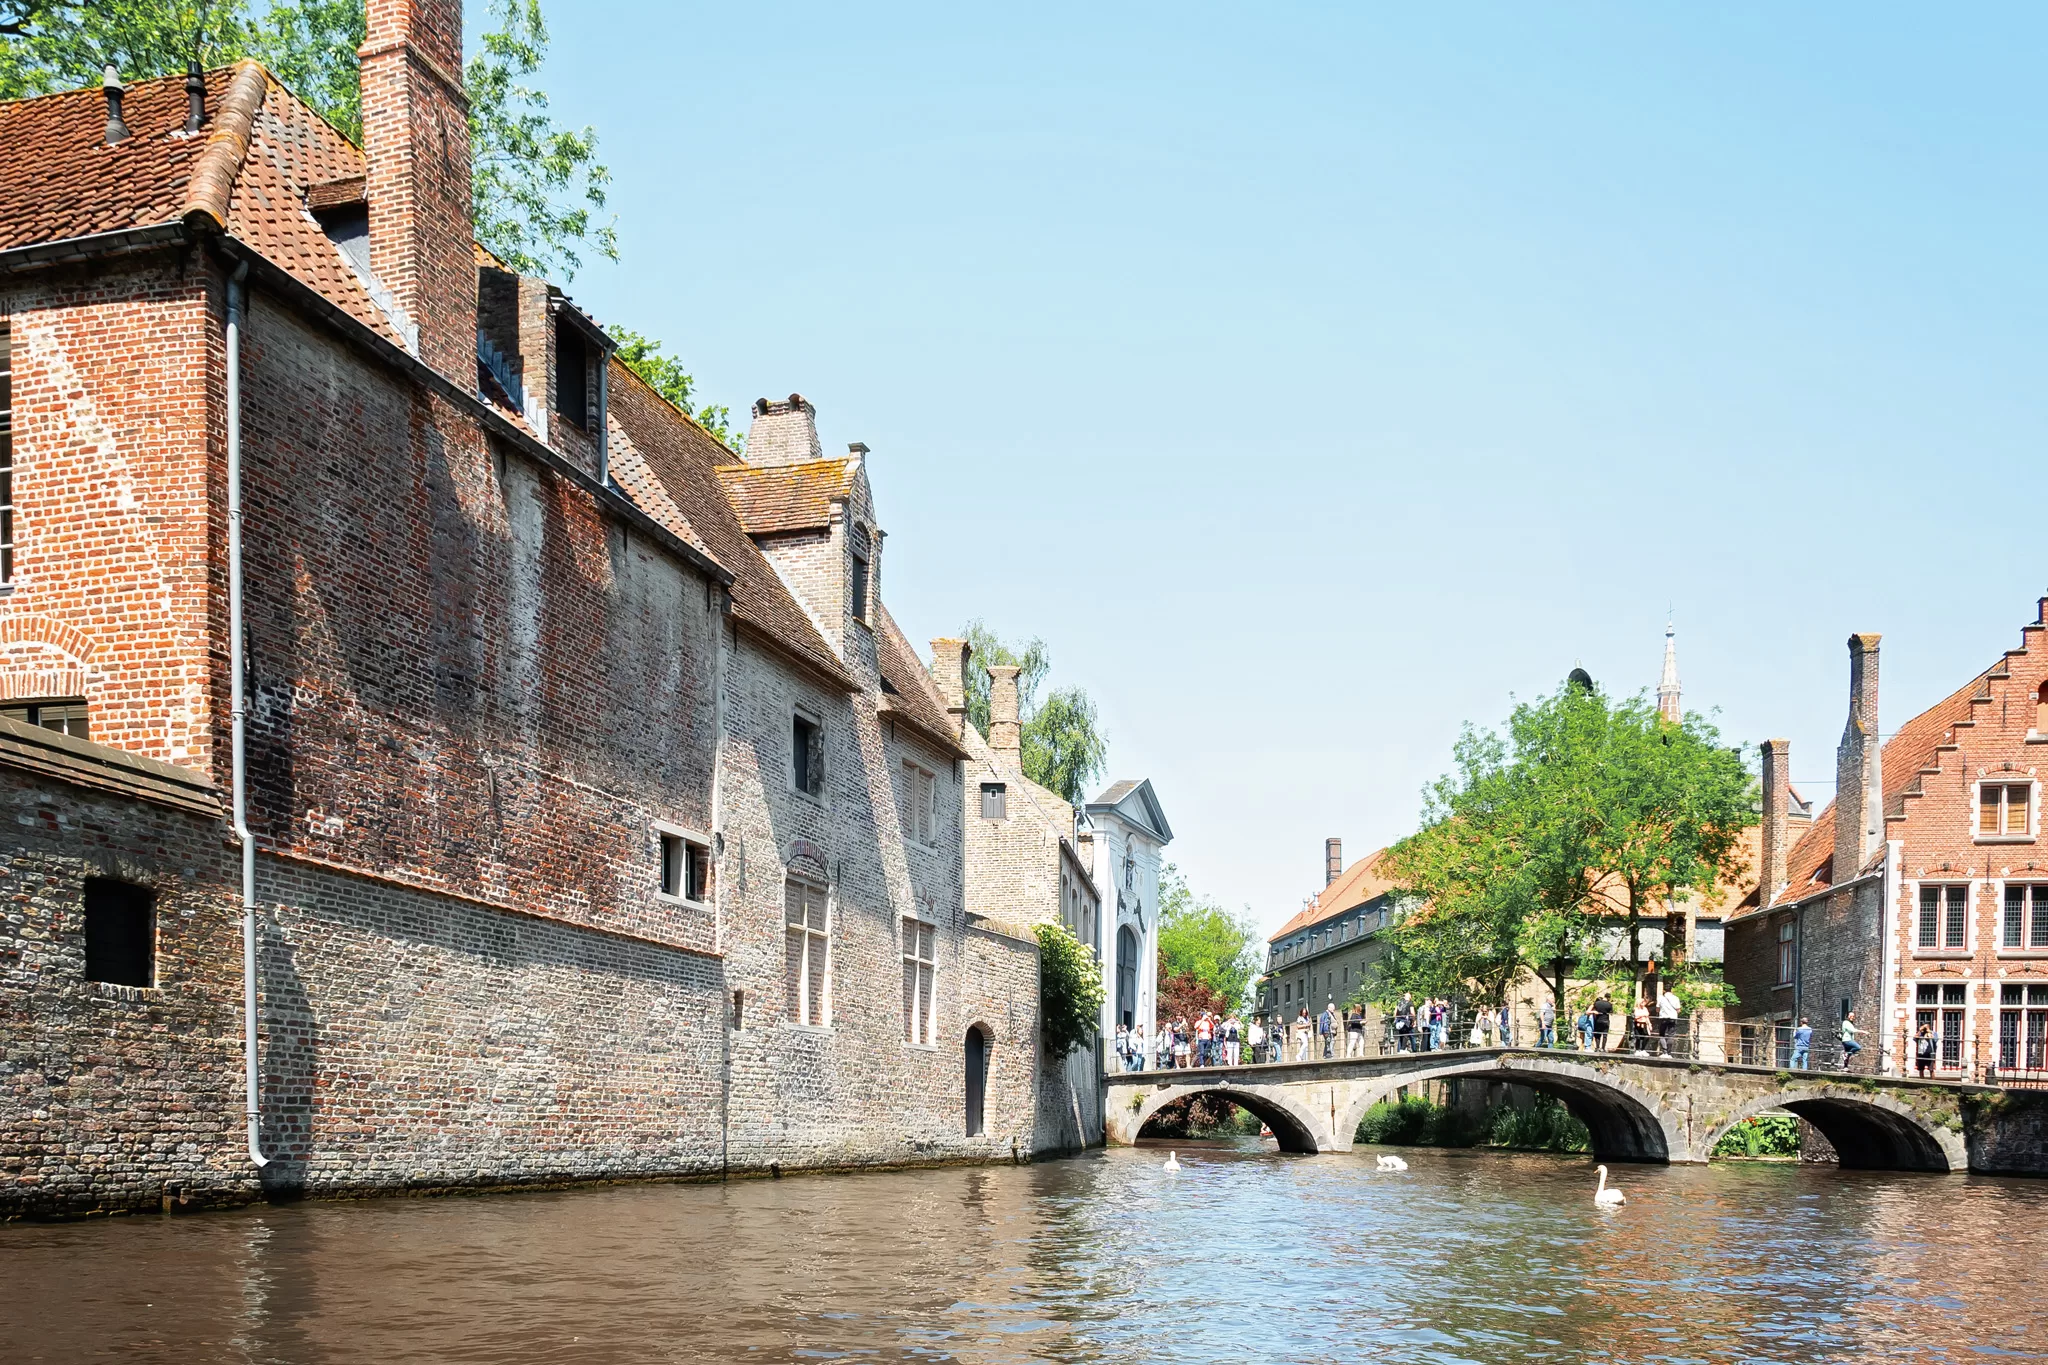 Image of the Bruges canals